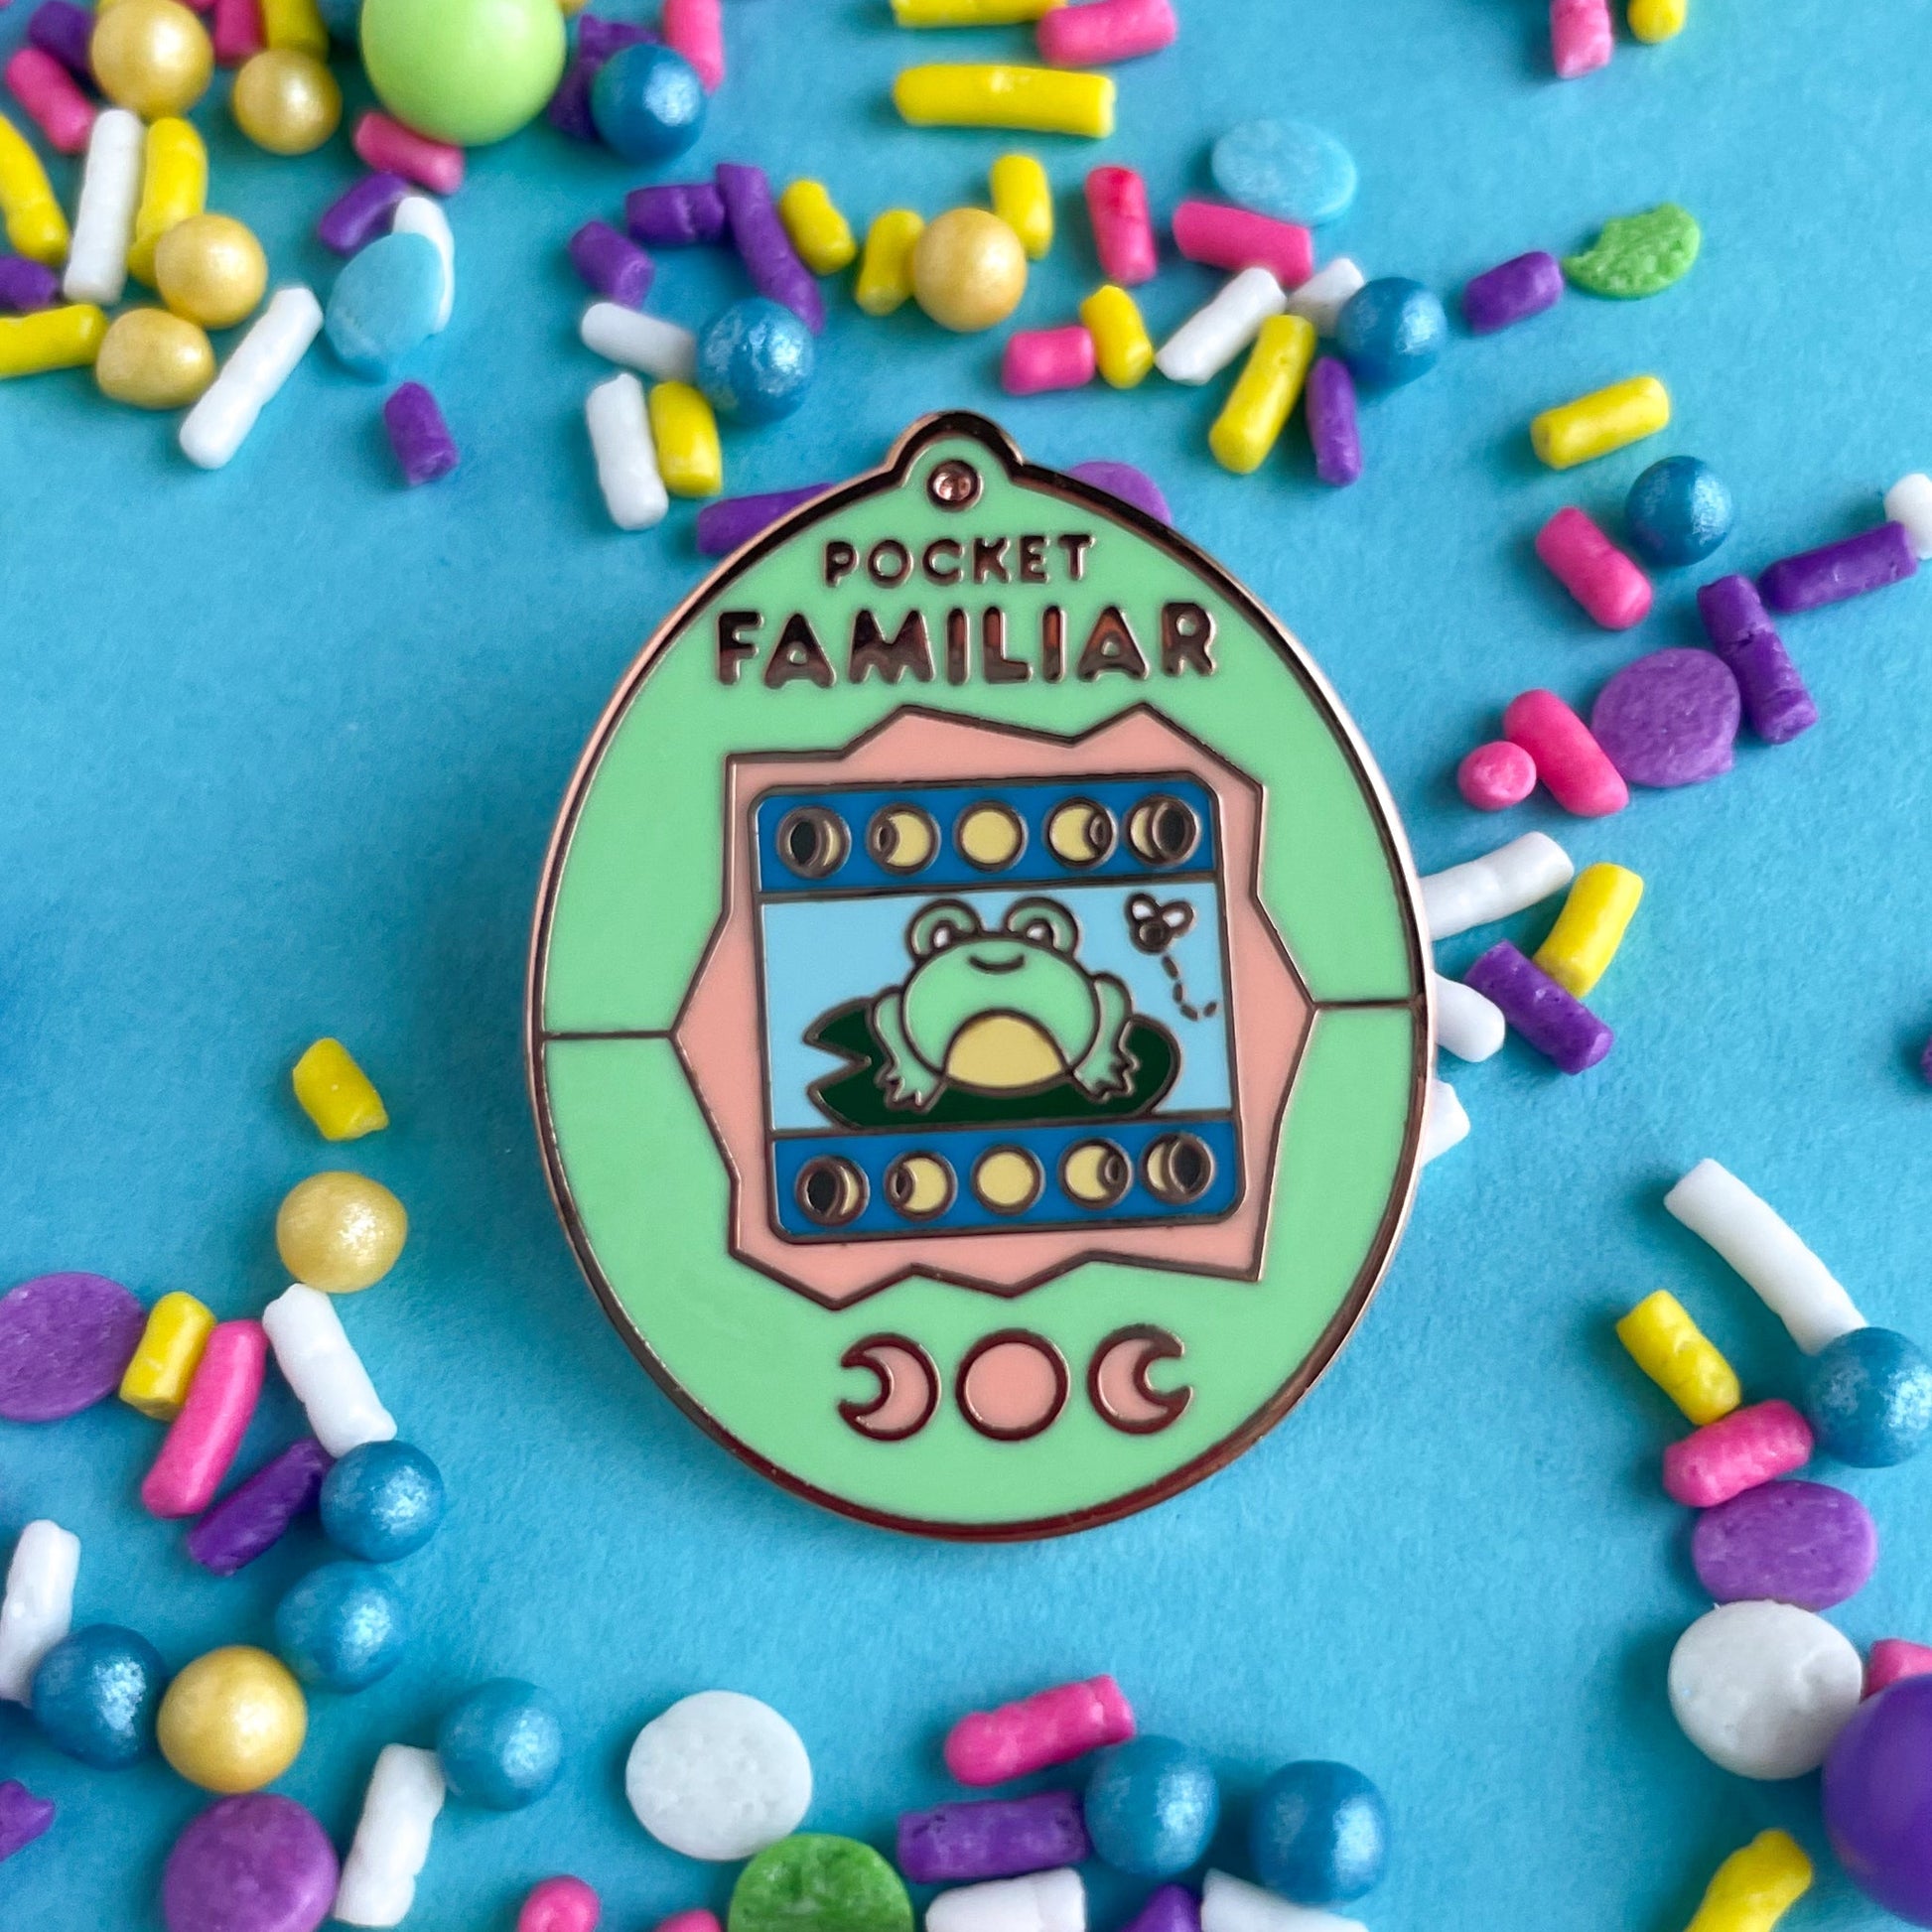 An enamel pin shaped like a Tamagotchi that reads "Pocket Familiar" at the top. It has a mint green and peach shell. The screen has moon phases and a frog on a lily pad looking at a fly. The buttons of the tamagotchi are moon phases. The pin is on a blue background covered in pastel sprinkles.